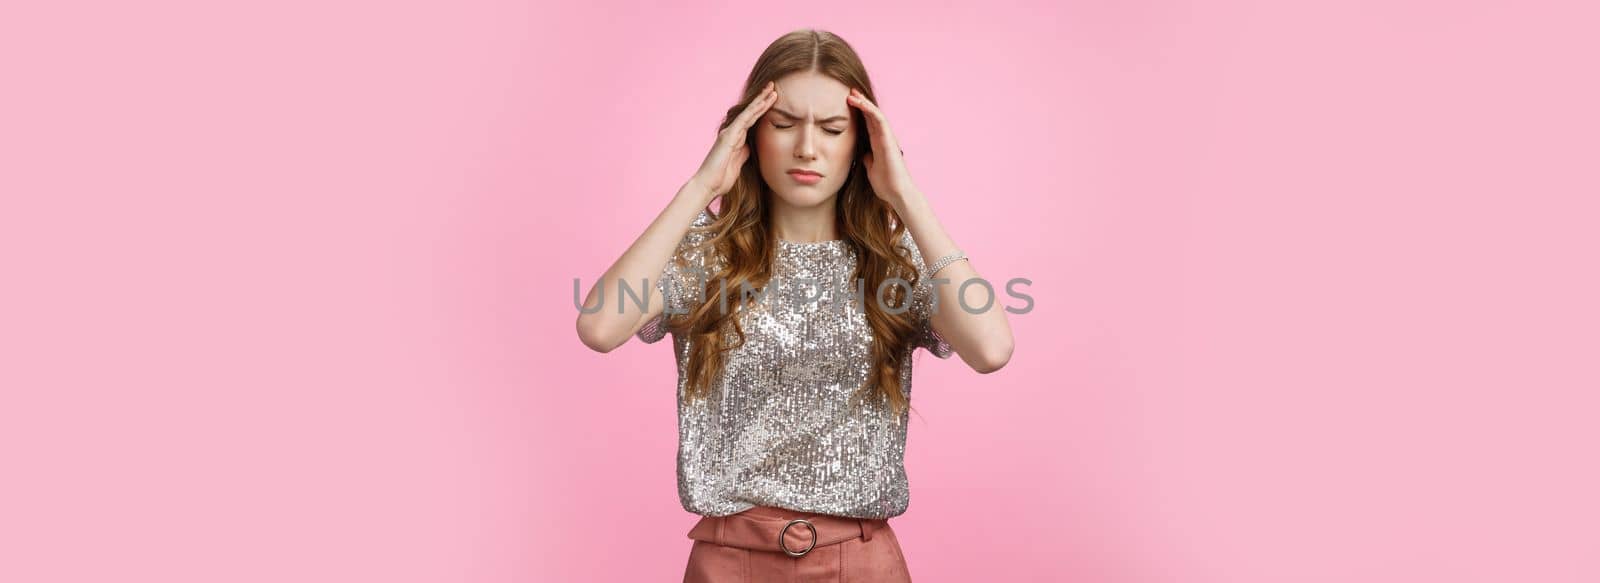 Caucasian woman feeling dizzy drink too much alcohol party, touching temples close eyes frowning suffering headache feeling discomfort, migraine, standing displeased unwell pink background.